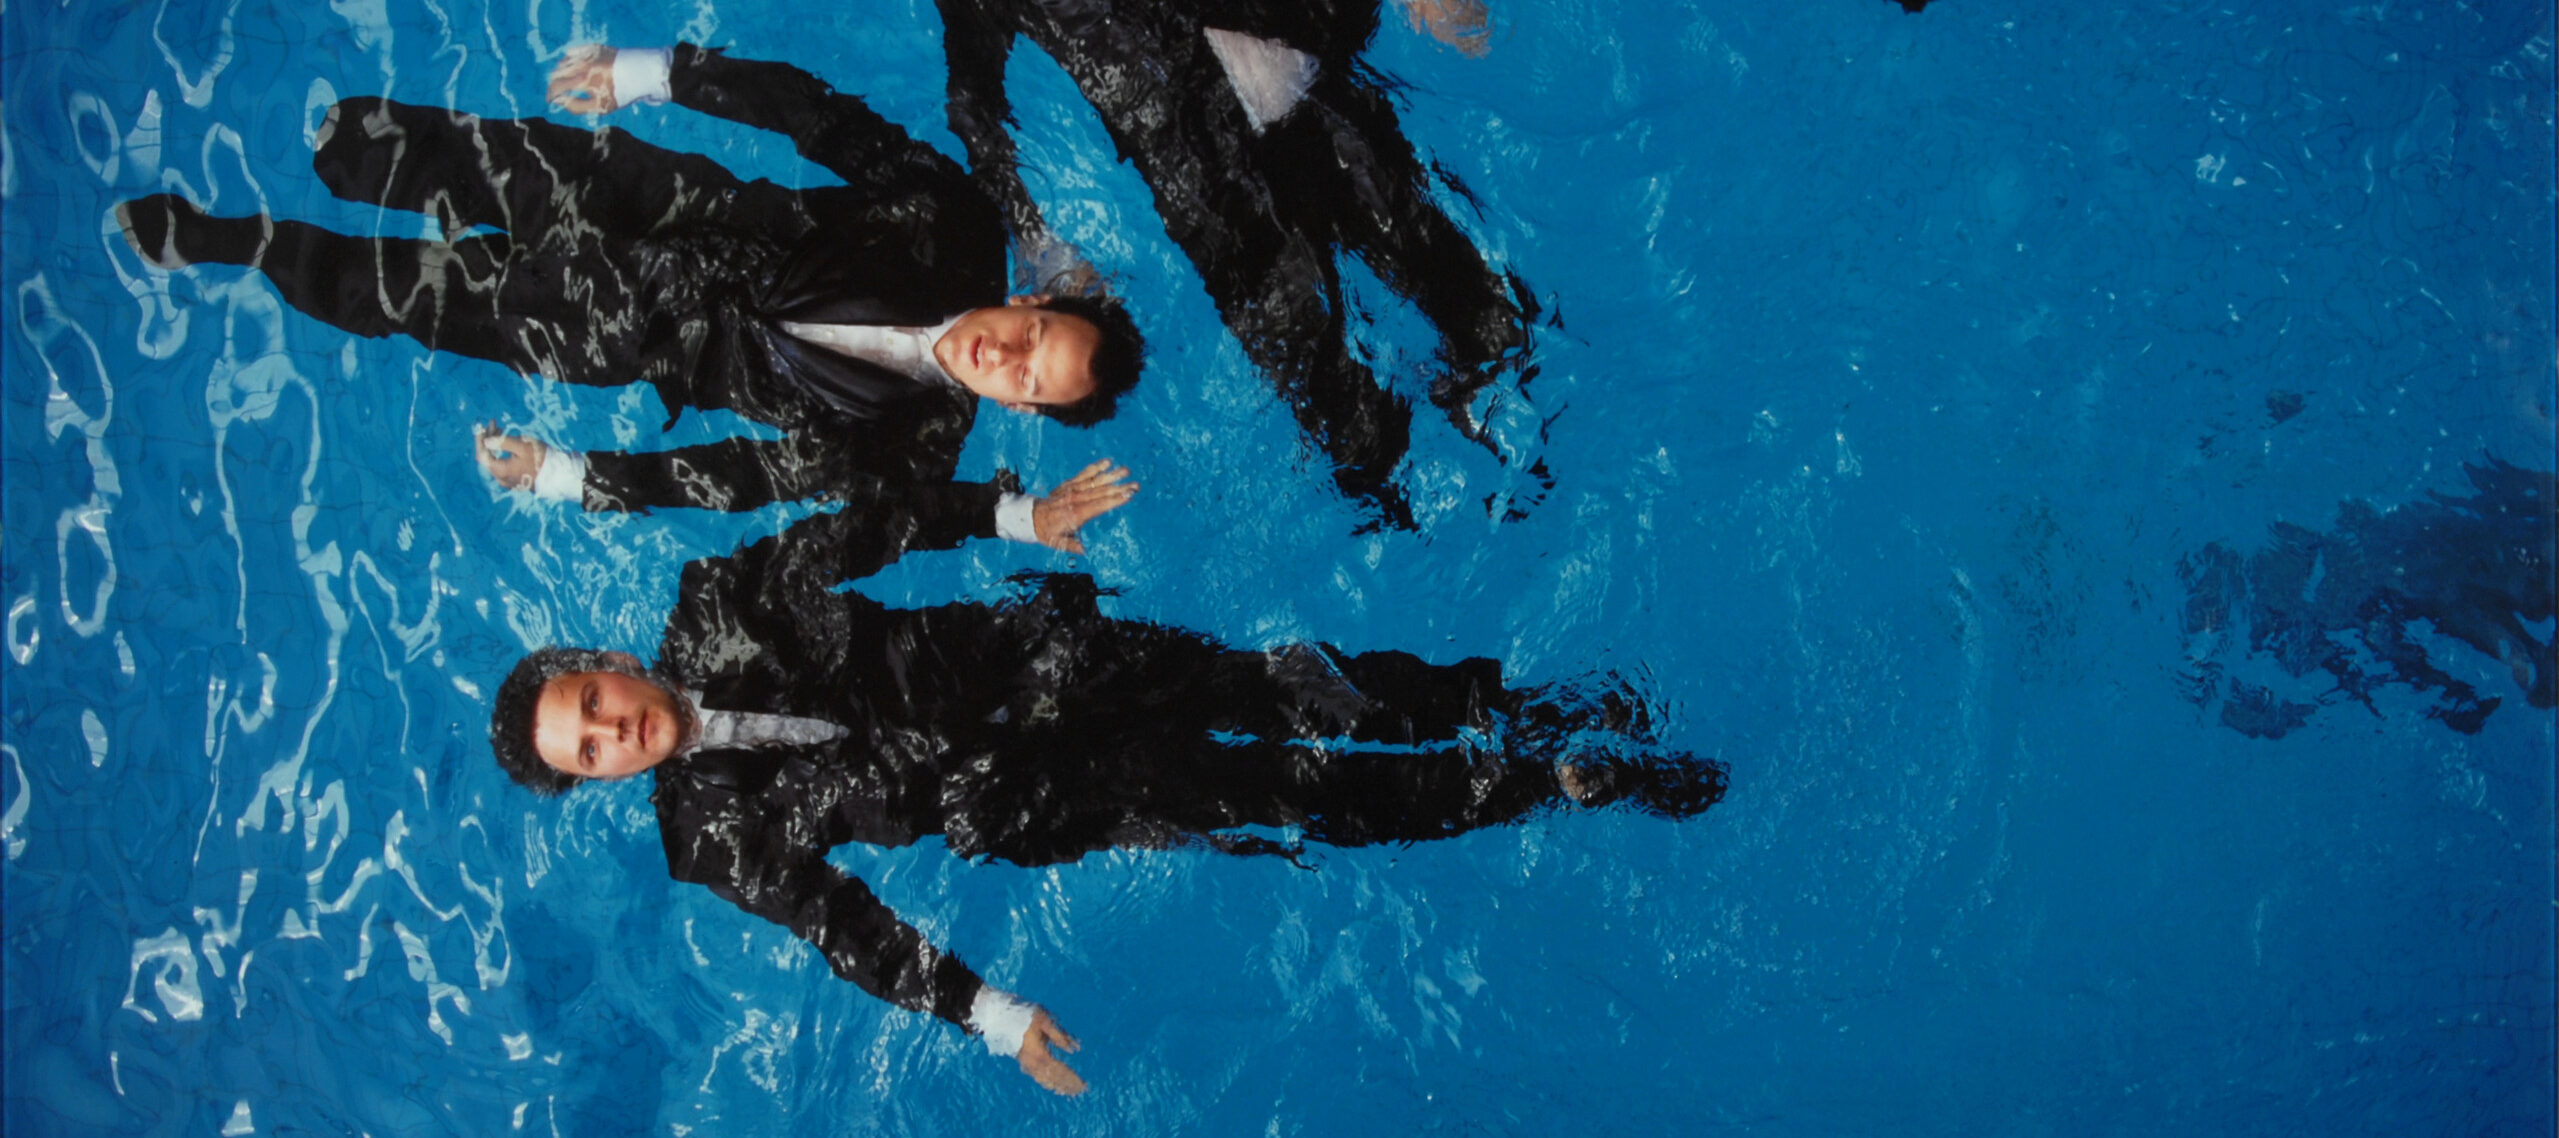 A photograph of four light-skinned figures with short brown hair, wearing black suits with white shirts, floating on their backs in a deep blue pool. The viewer looks down on the figures from above. One figure has their eyes closed, the rest have their eyes open.